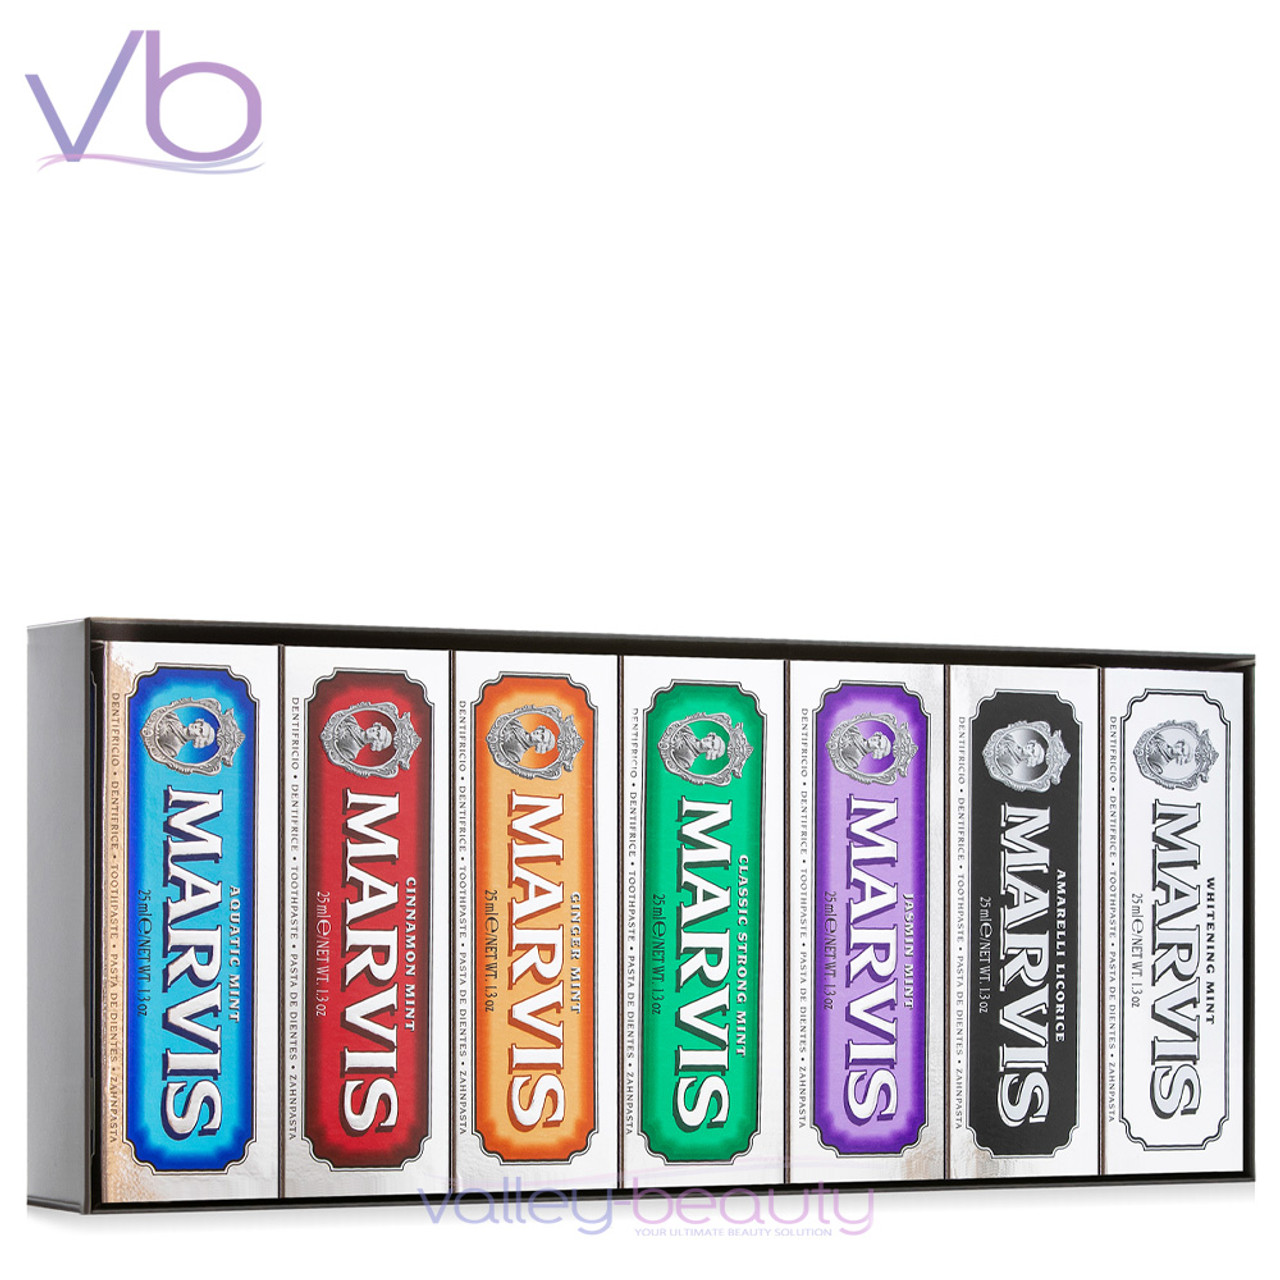 Marvis 7 Flavor Box | Italian Toothpaste for Each Day Of the Week